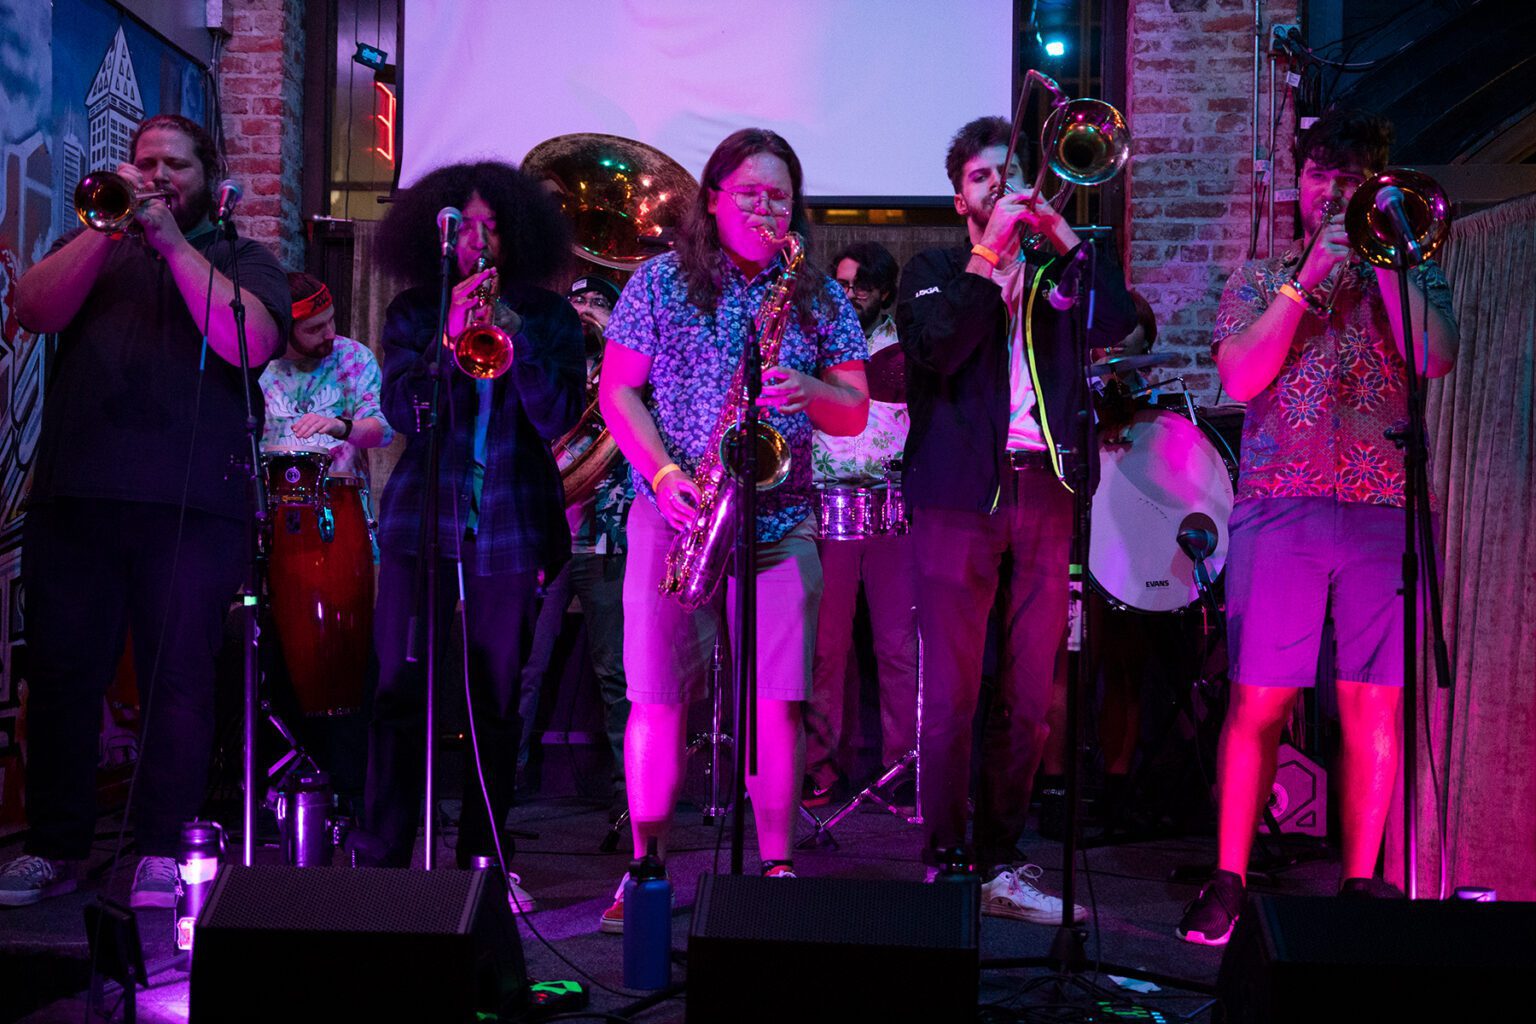 Hear modern sounds along with traditional New Orleans brass band music when Analog Brass performs at the Kulshan Trackside stage Thursday